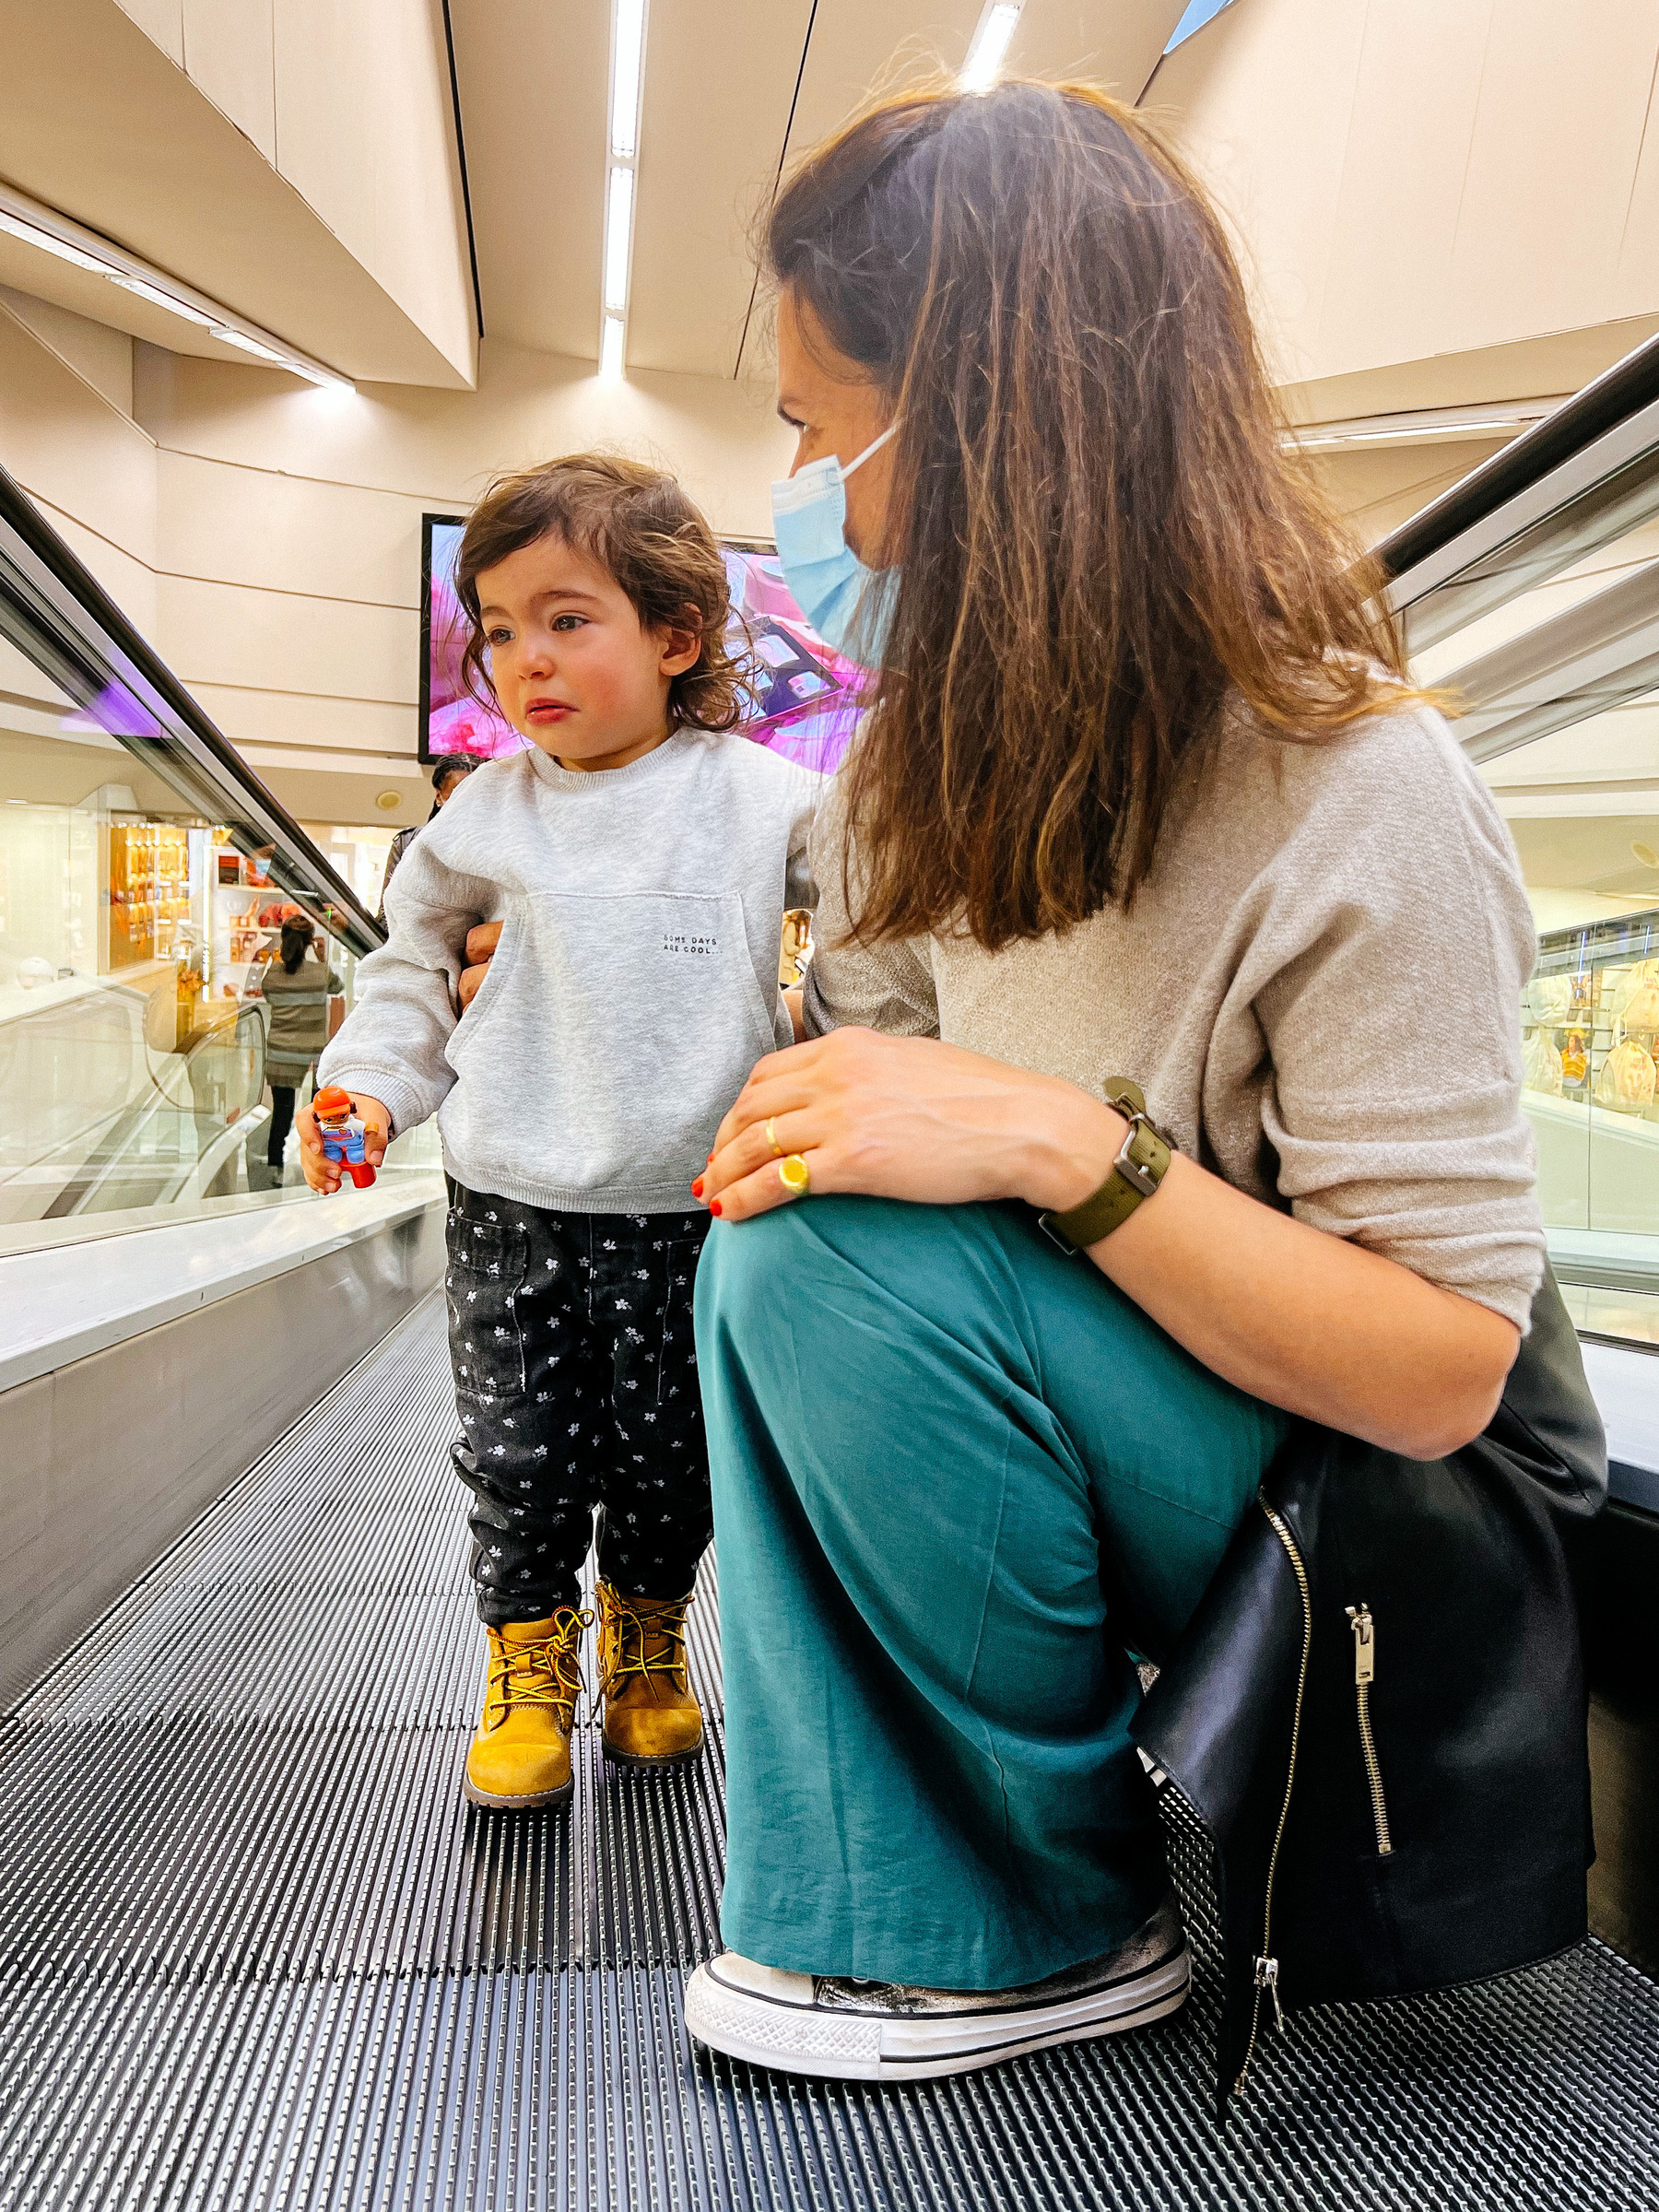 A toddler and her mom ride a moving walkway. The mom is on her knee, the little one seems a little distressed by the experience. 